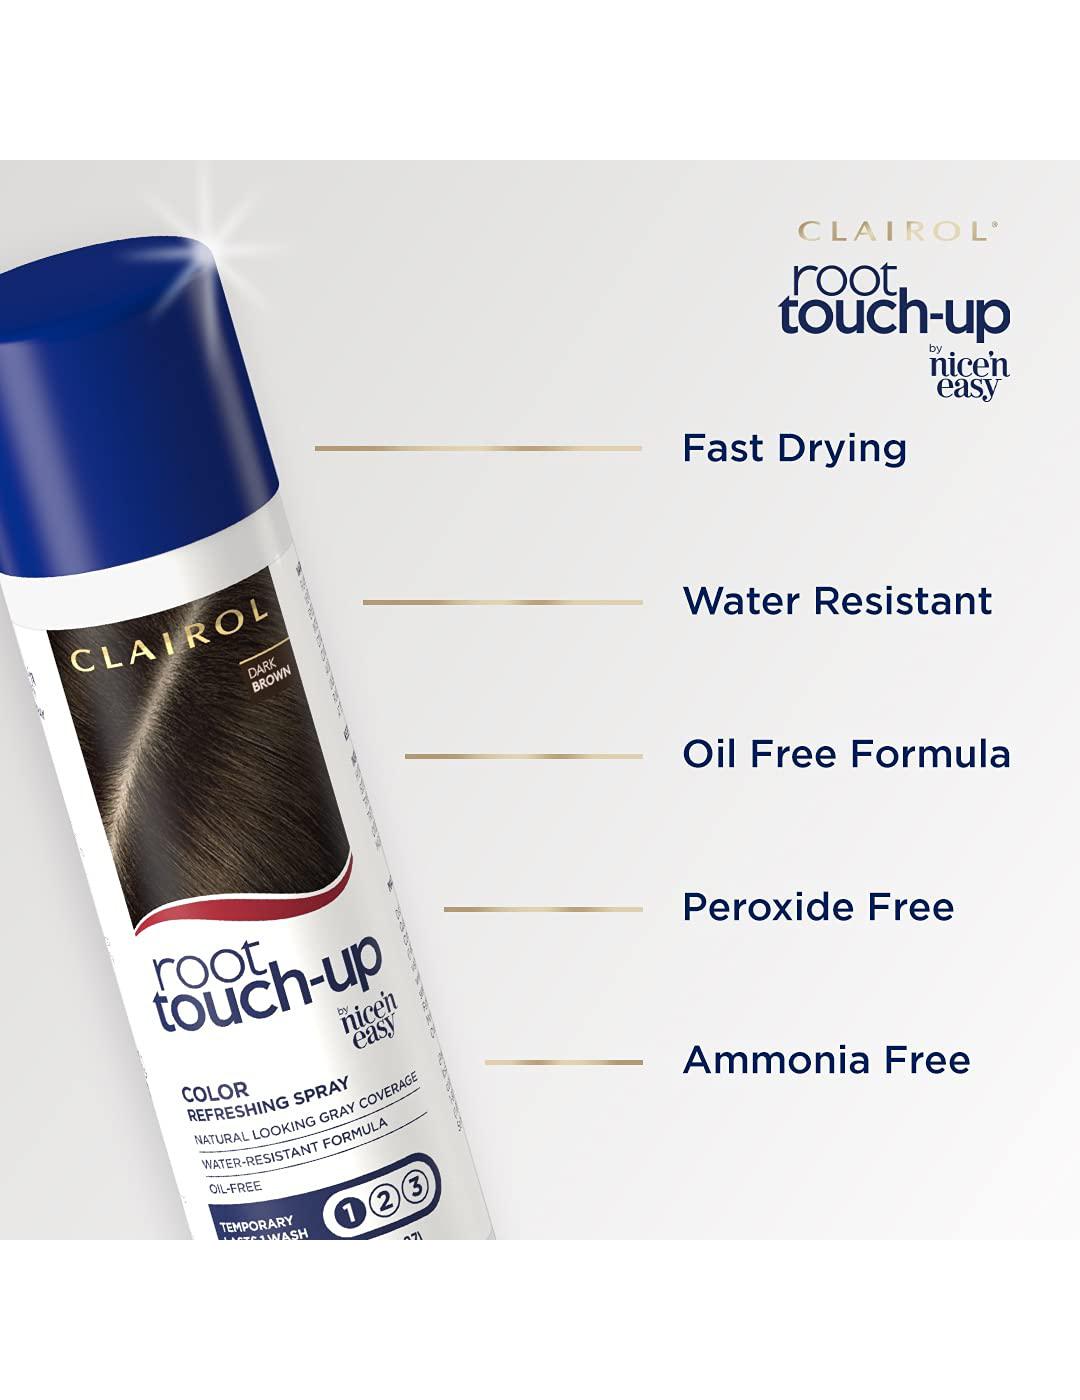 Clairol Root Touch-Up Color Refreshing Spray Medium Brown; image 2 of 3